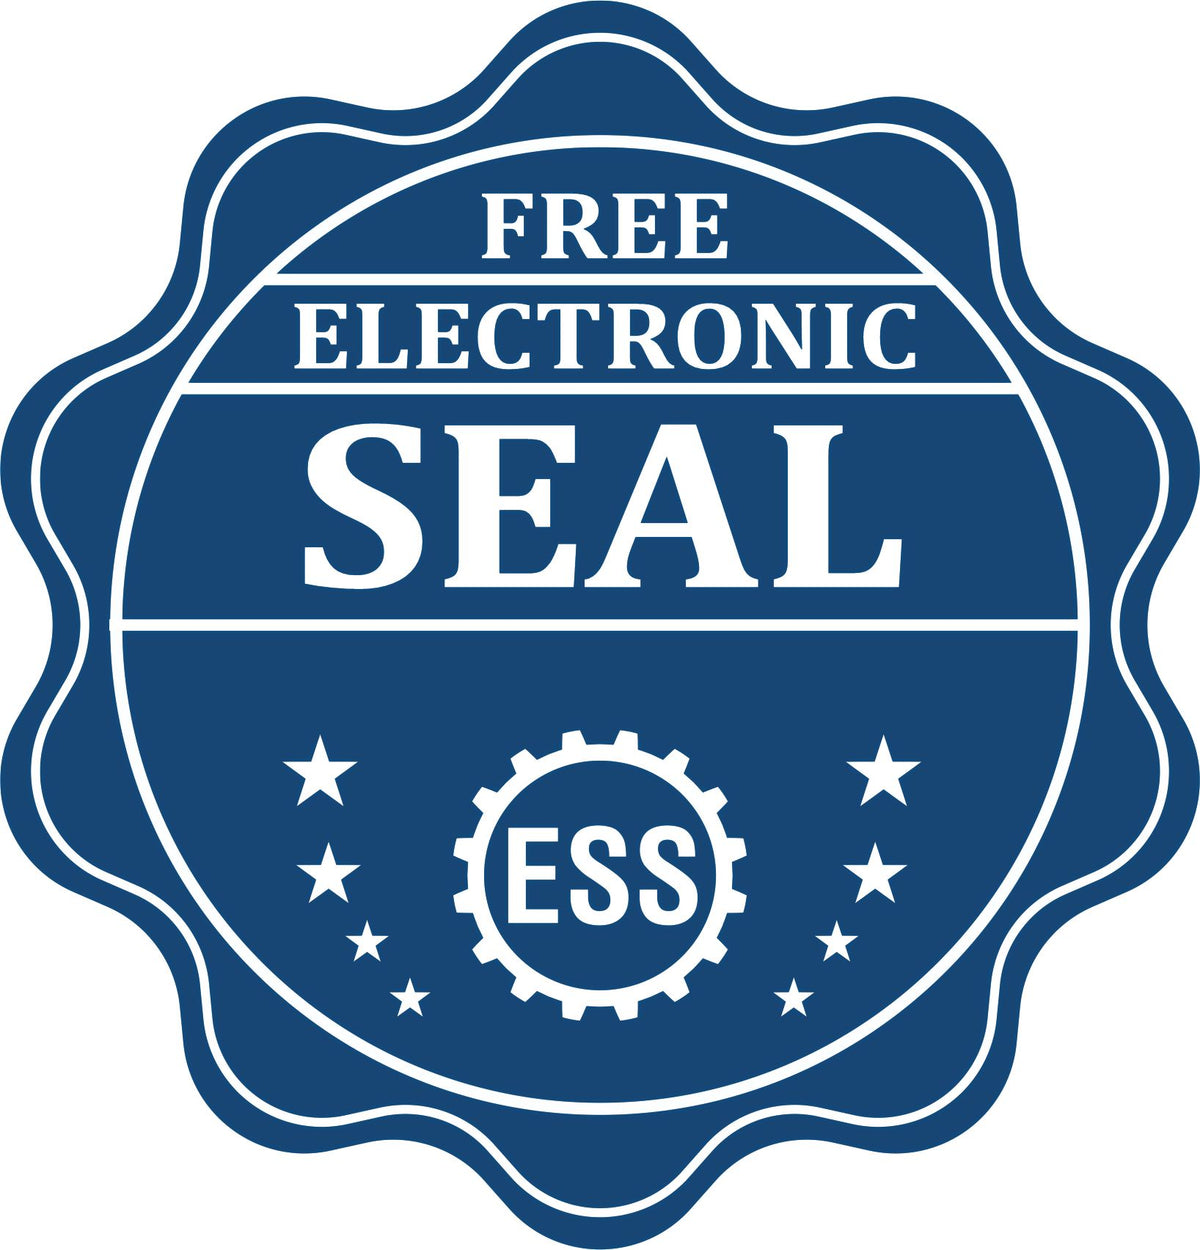 A badge showing a free electronic seal for the Hybrid Iowa Geologist Seal with stars and the ESS gear on the emblem.